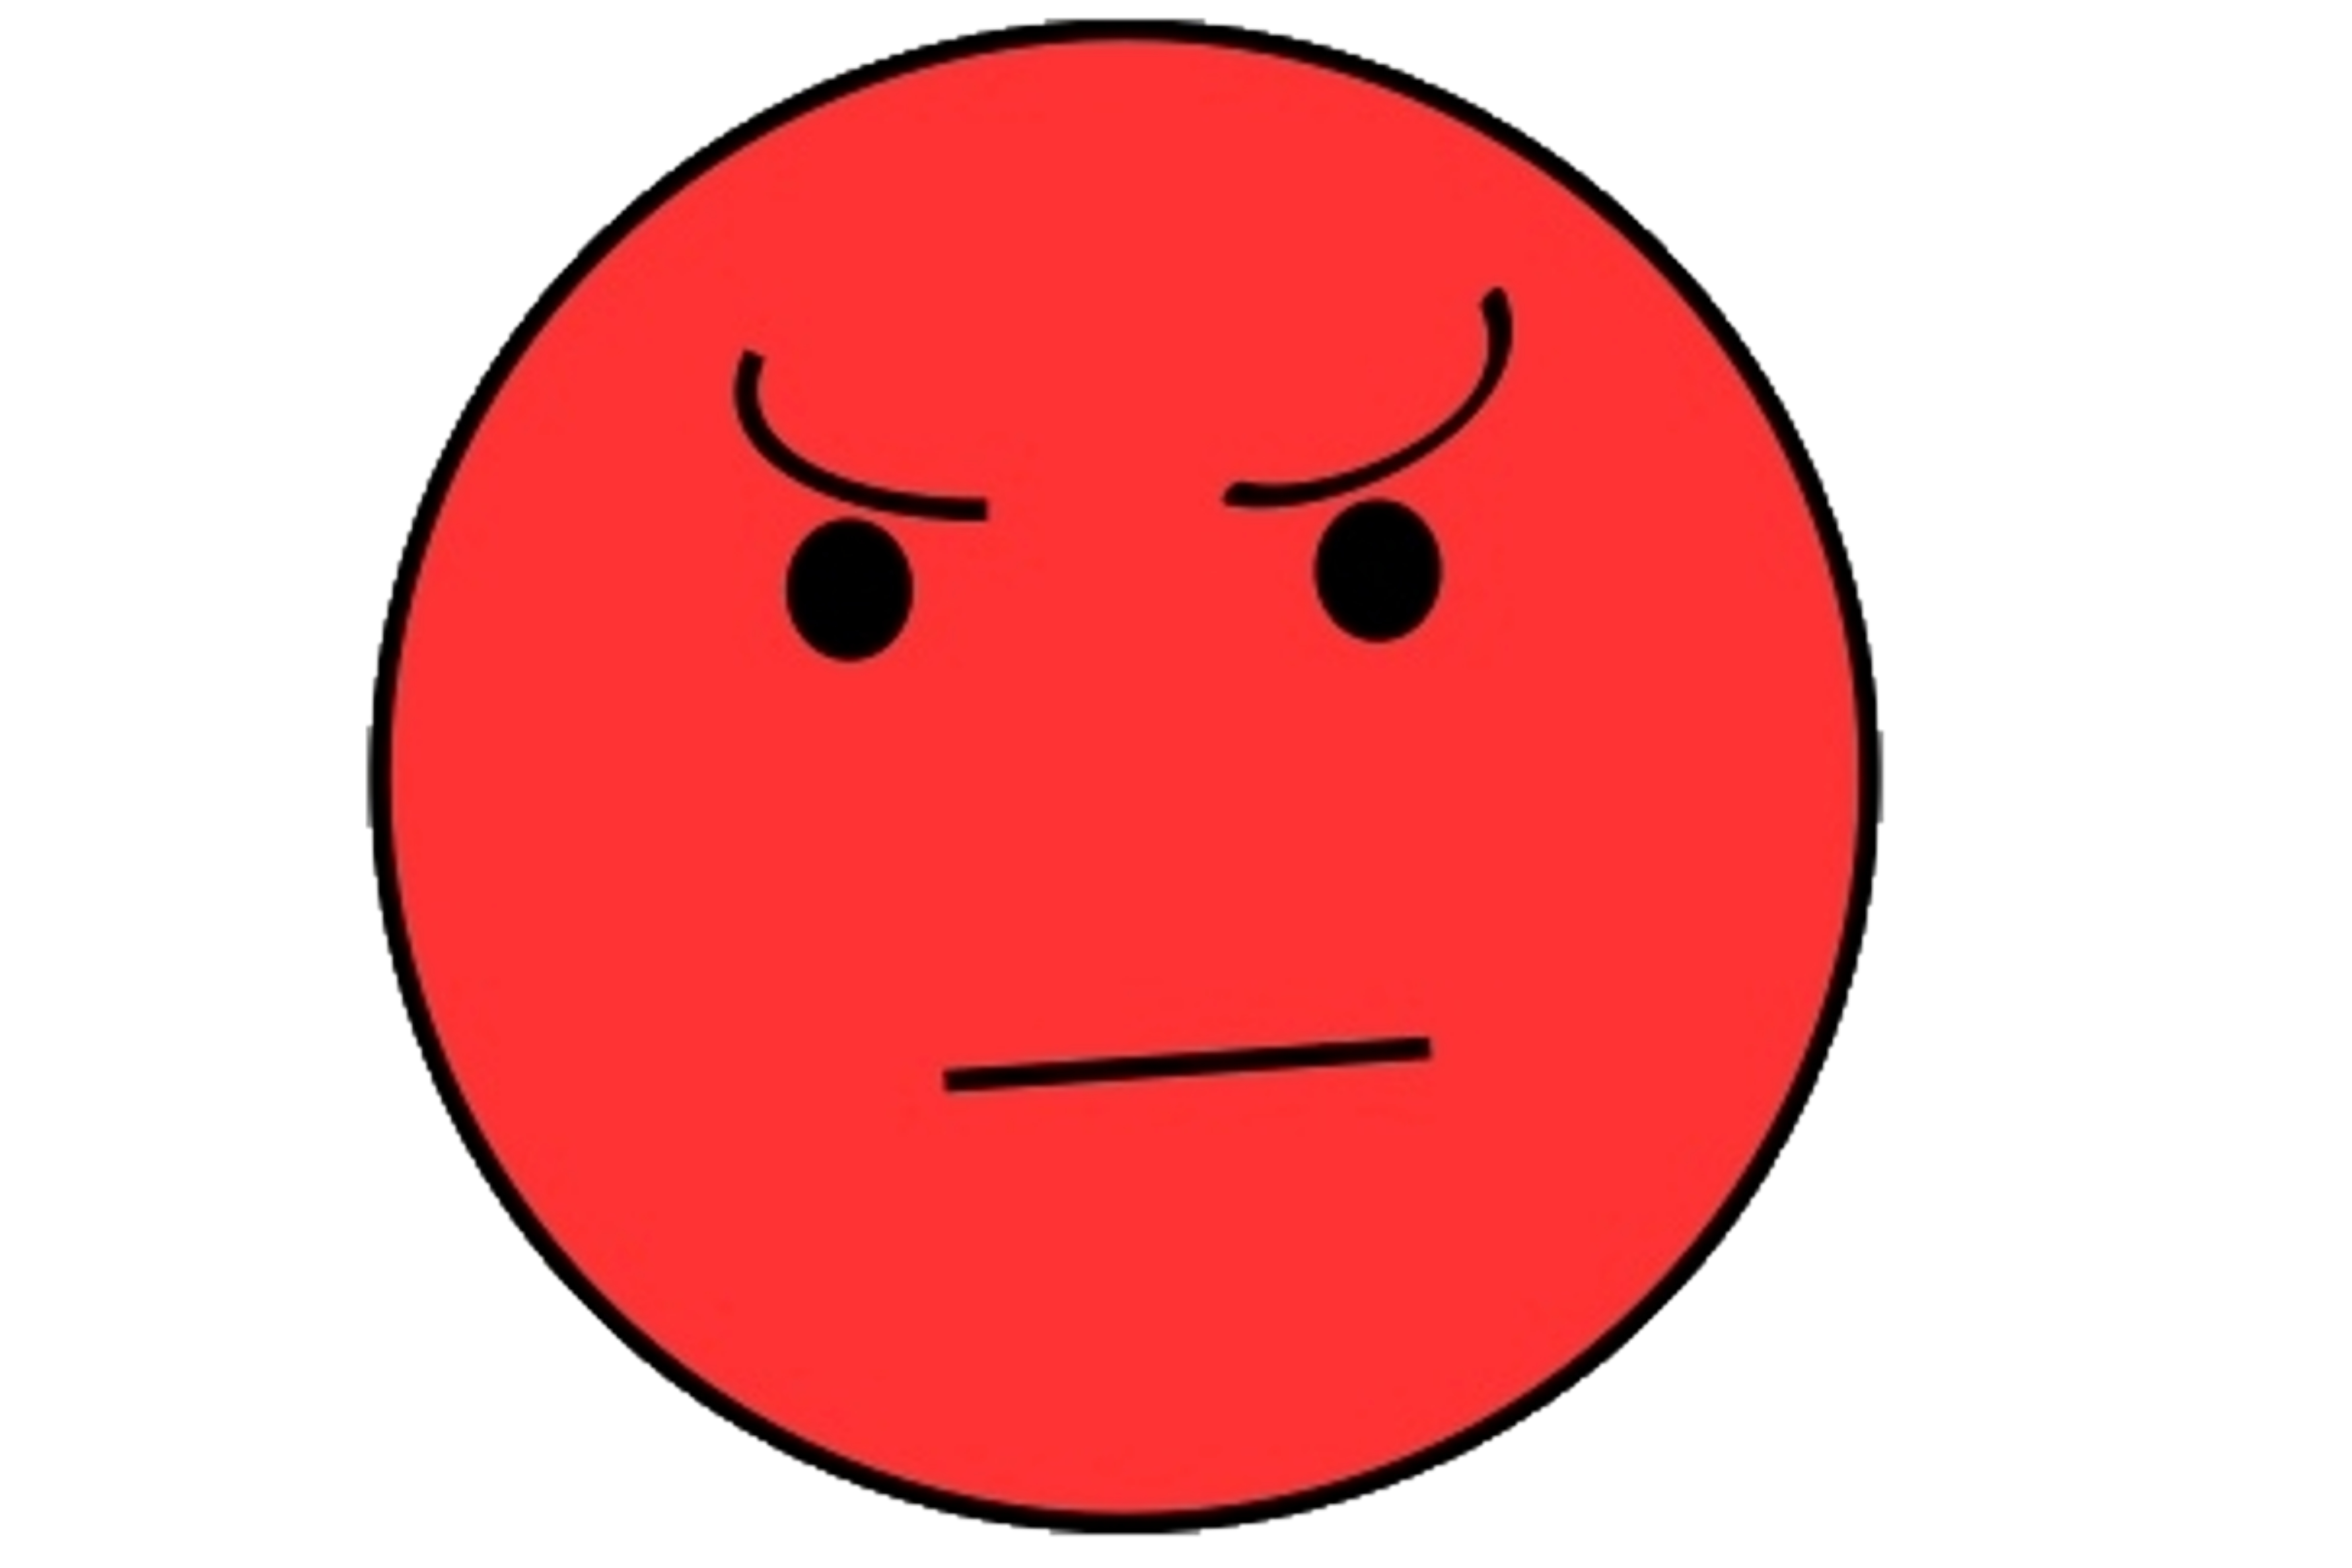 Free Images Of Angry Faces, Download Free Clip Art, Free.